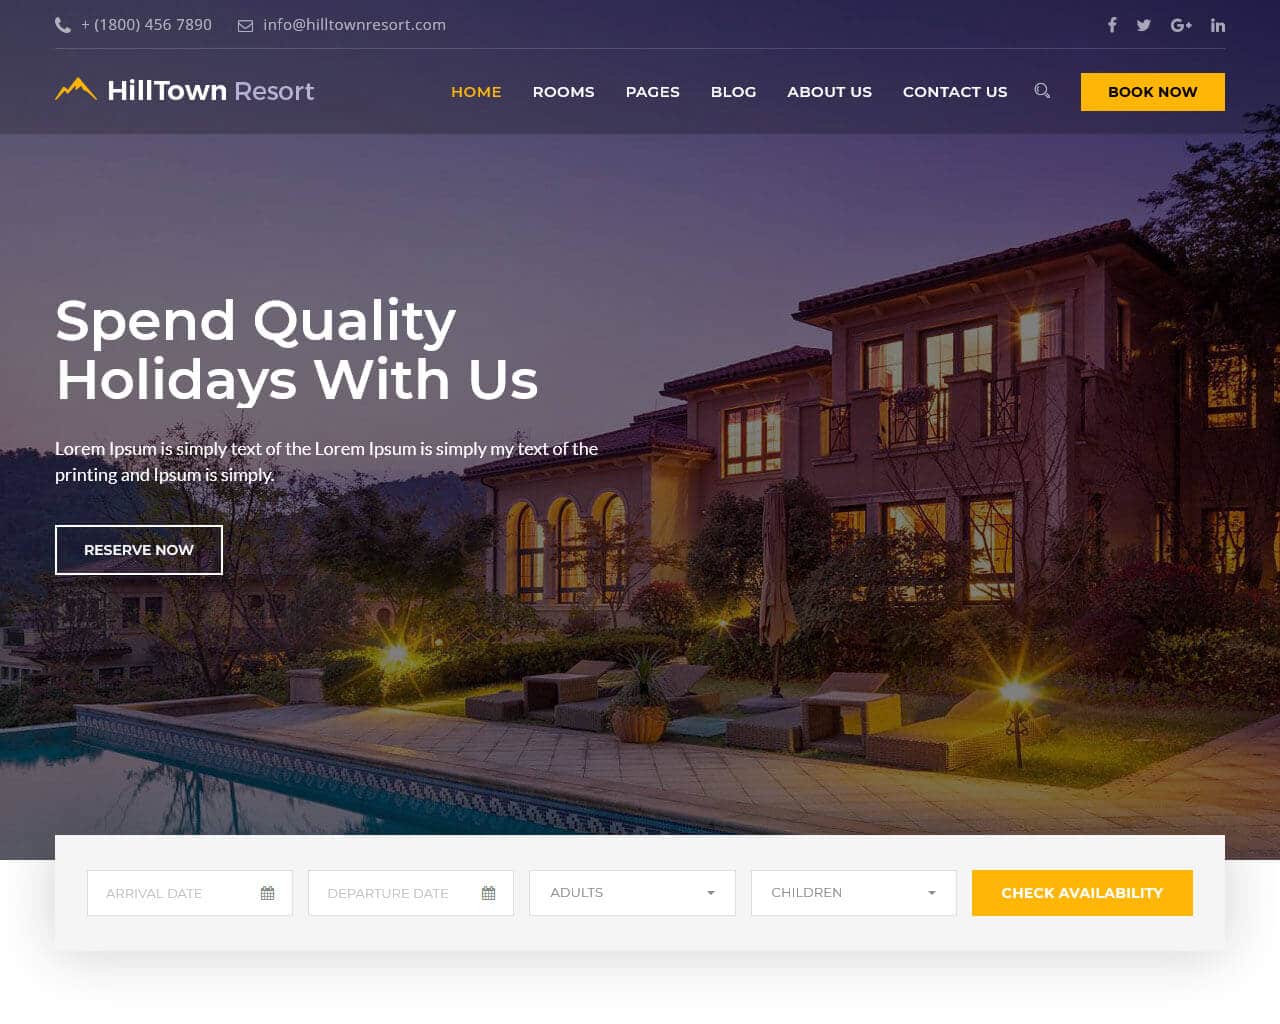 20-hotel-website-templates-to-build-the-best-booking-website-2019